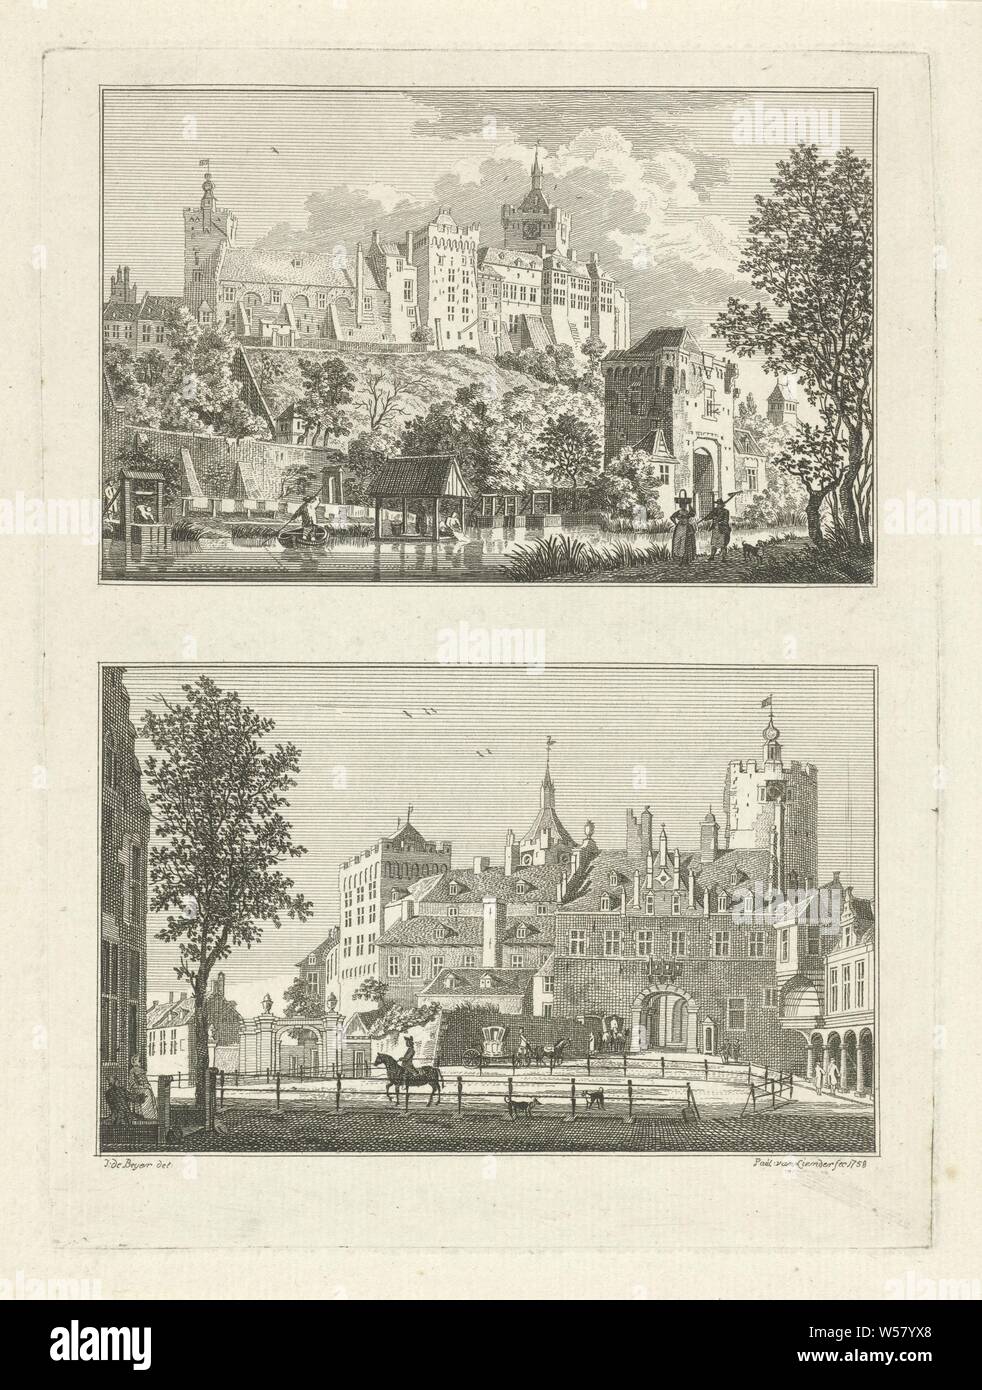 Schwanenburg in Kleve Village and townscapes in Kleve (series title), Two representations of one album. Two views of Schwanenburg in Kleve, seen from the Kermisdahl (above) and from the city (below). The print is part of a 100-part series with views of villages and towns in Kleve, landscape with tower or castle, Zwanenburcht, Paulus van Liender (mentioned on object), 1758, paper, etching, h 203 mm × w 152 mm Stock Photo